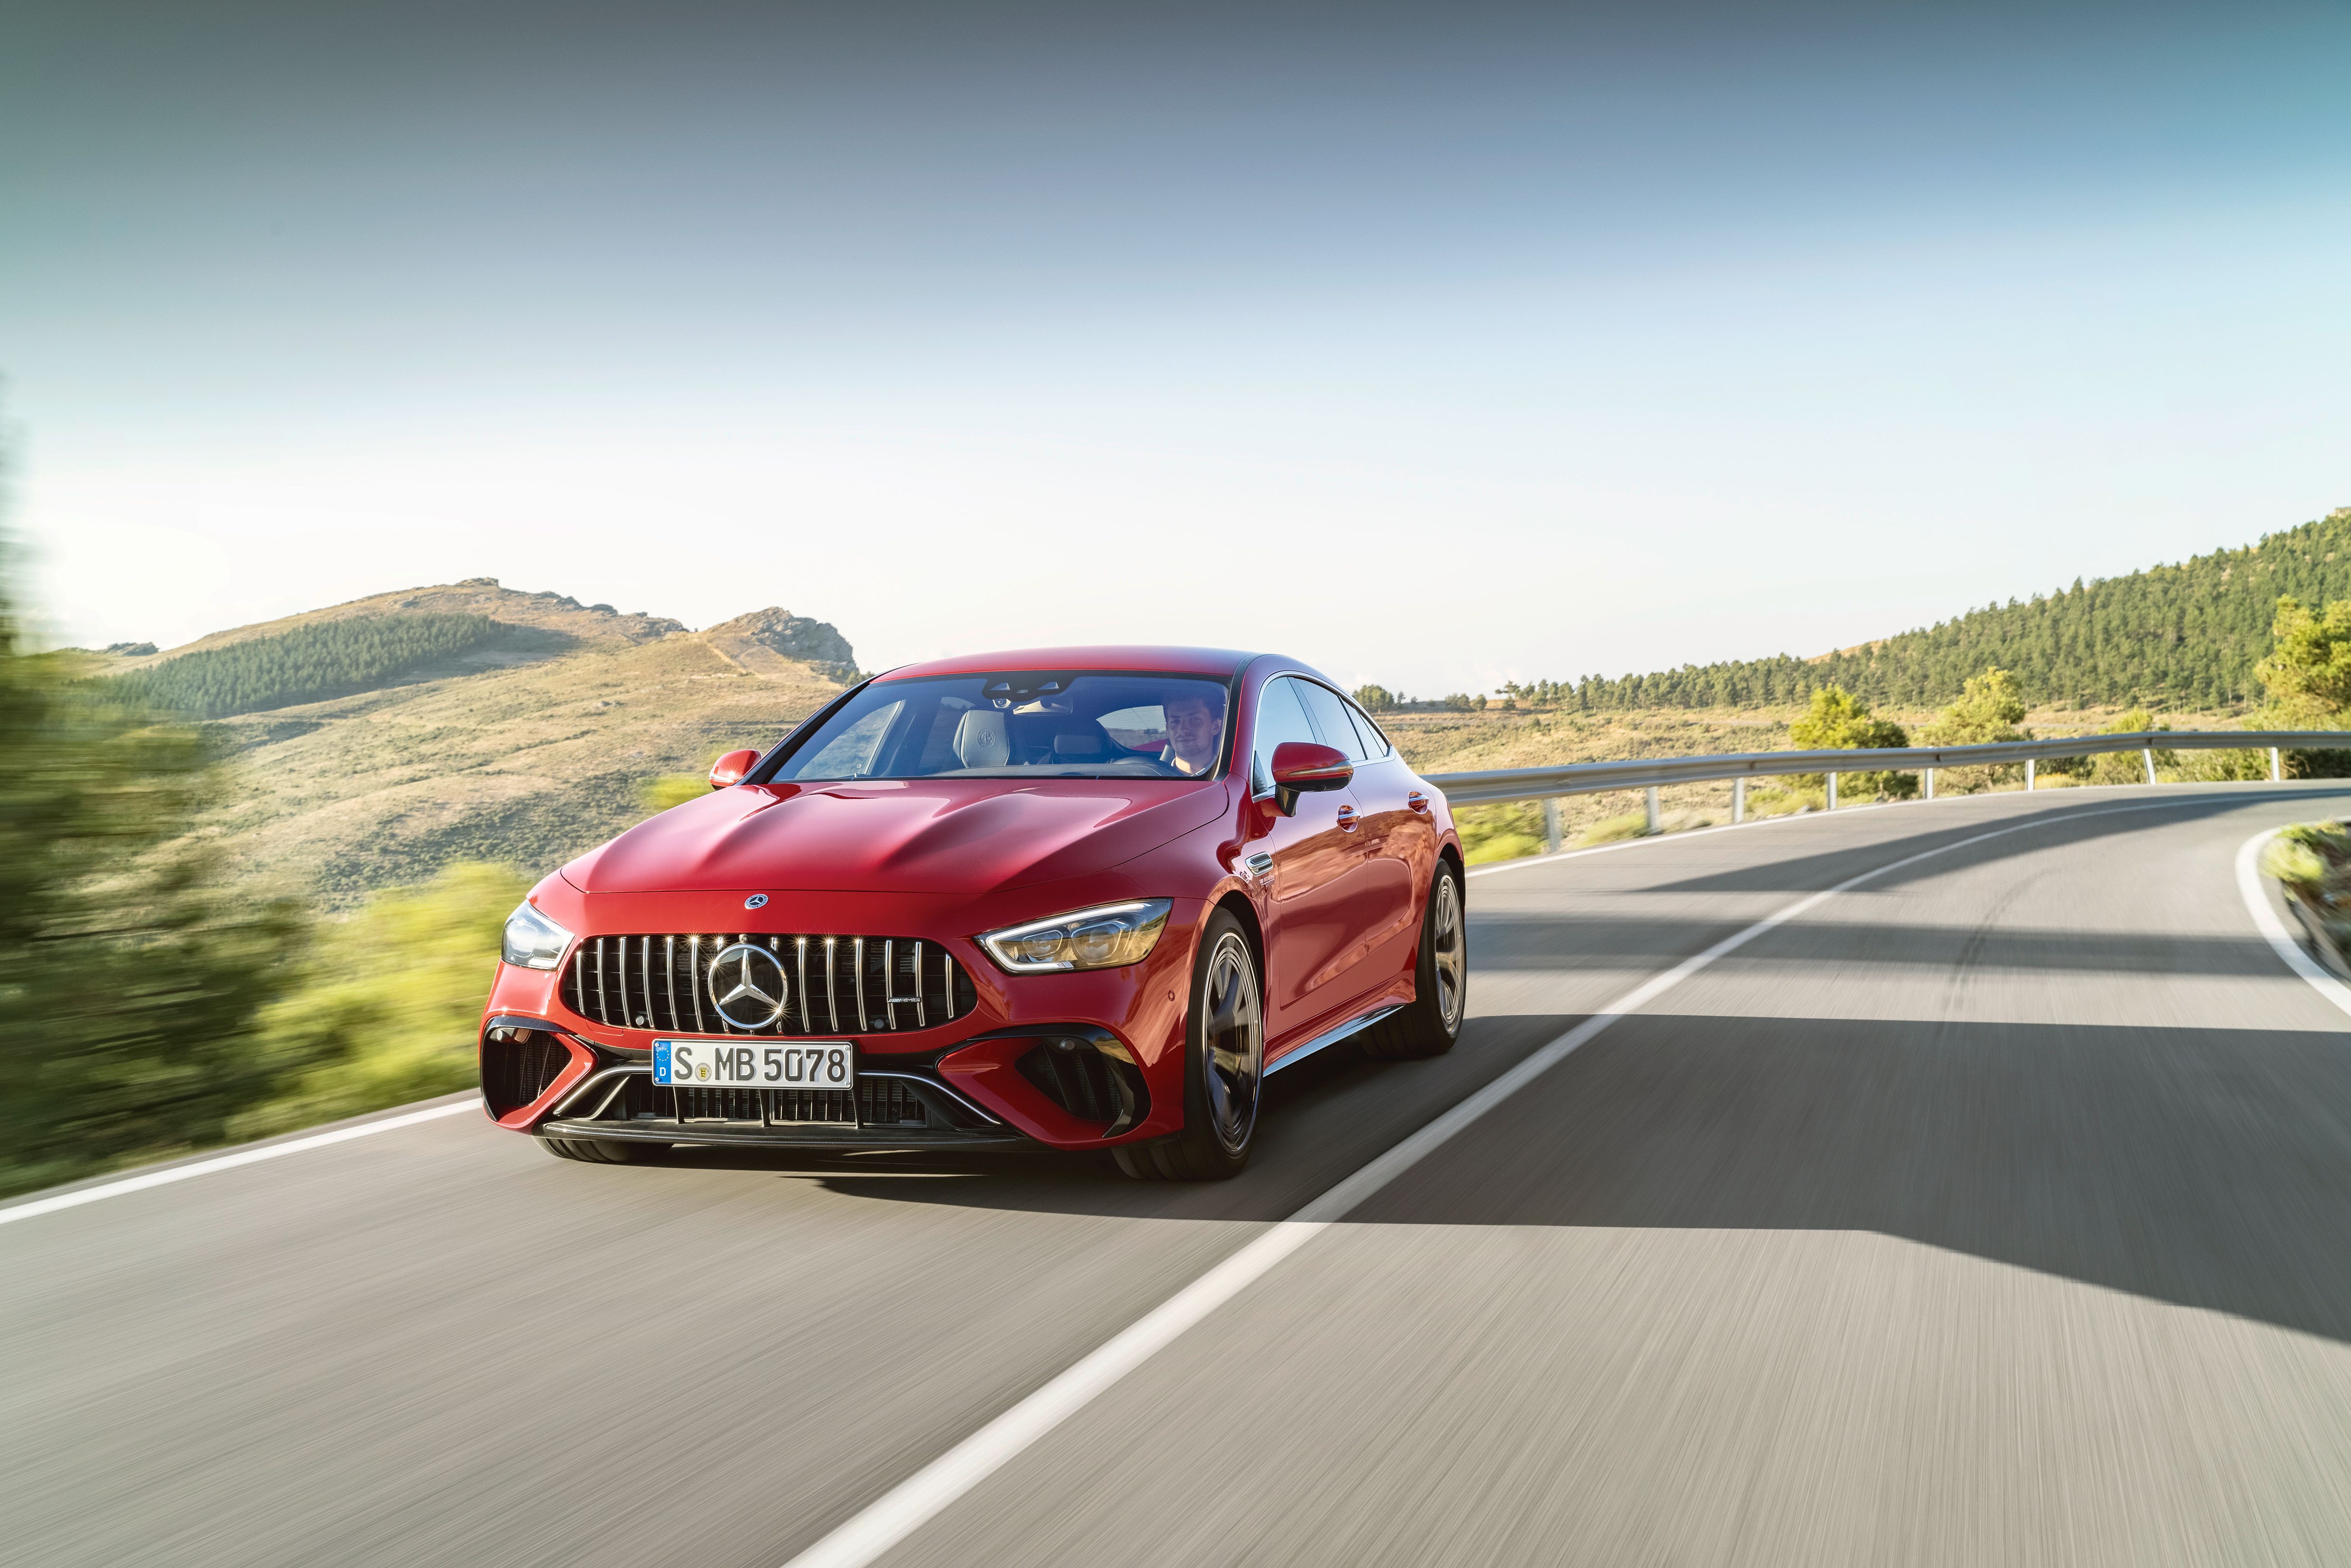 Mercedes-AMG GT 63 S E Performance Front 3.5 View On The Road